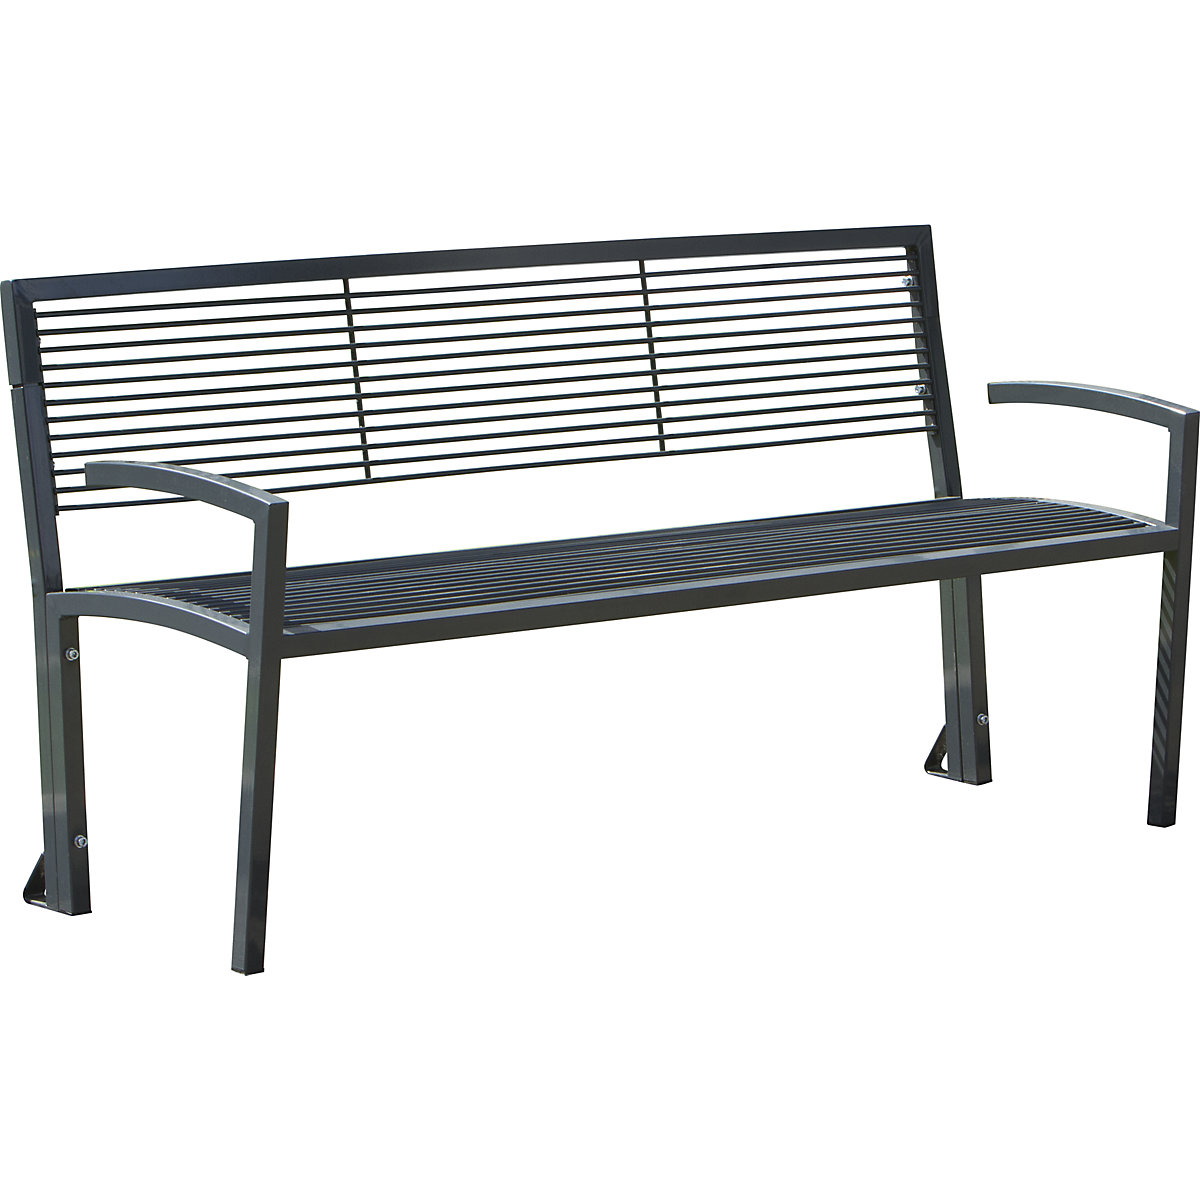 Metal bench, in grey cast iron finish, LxWxH 1500 x 555 x 780 mm